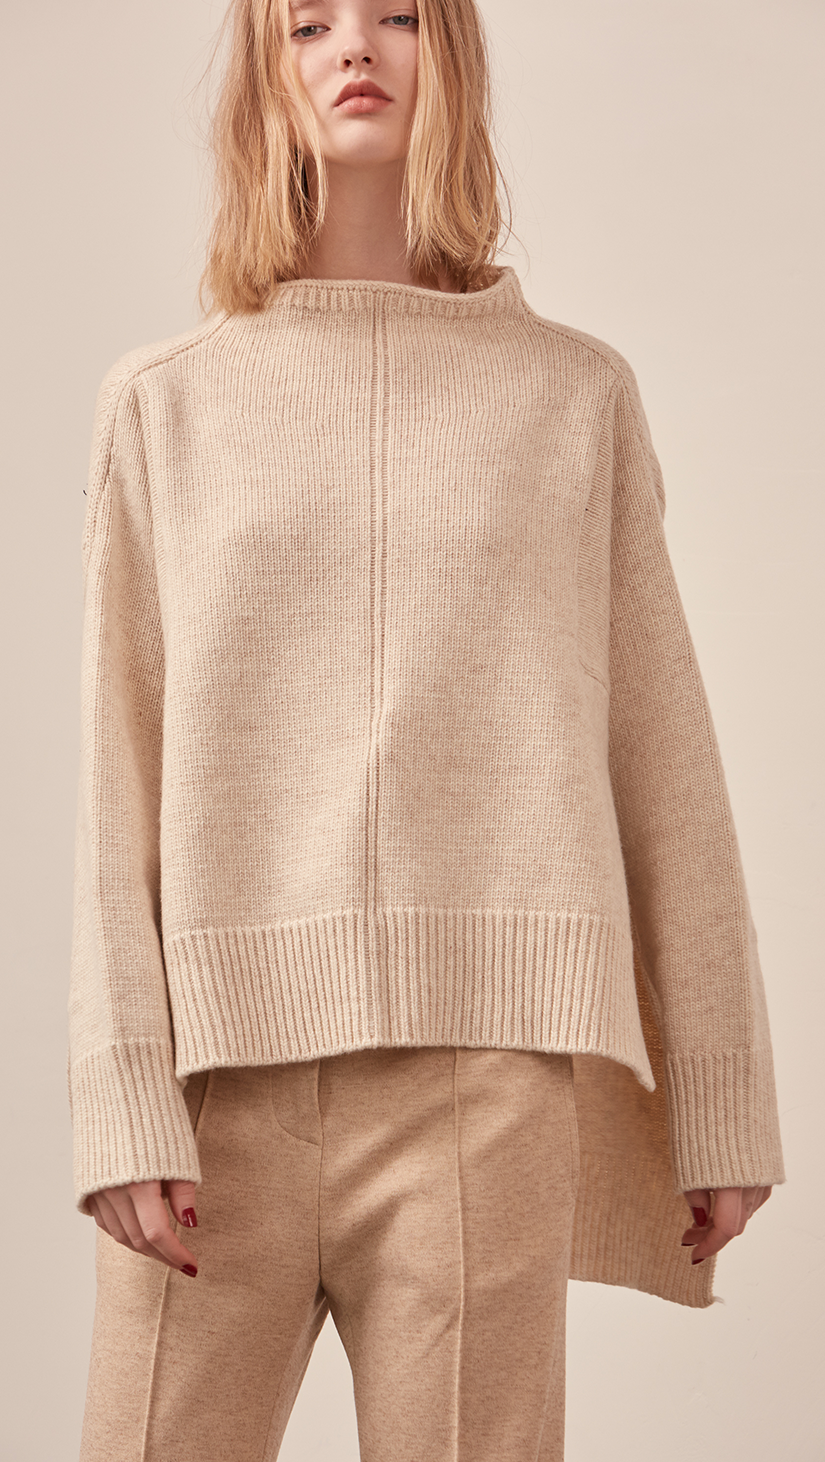 The Erin Sweater in soft oatmeal. Features rolled neckline, long sleeves, drop shoulder, side slits. Pull on. Relaxed silhouette.